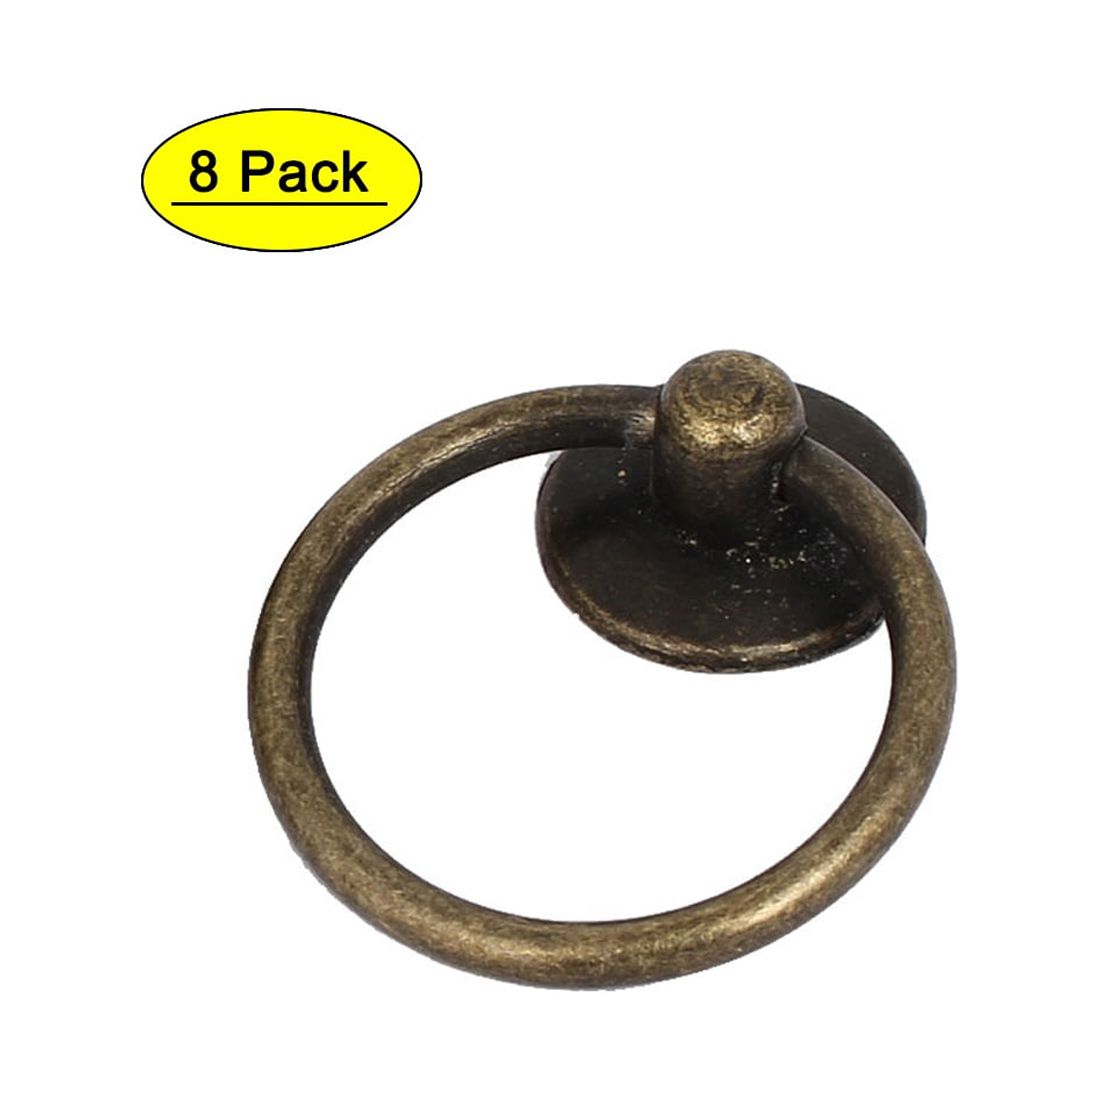 Uxcell Furniture Drawer Door Retro Style Ring Pull Handles Bronze Tone 52x43x13mm 8pcs - image 1 of 7